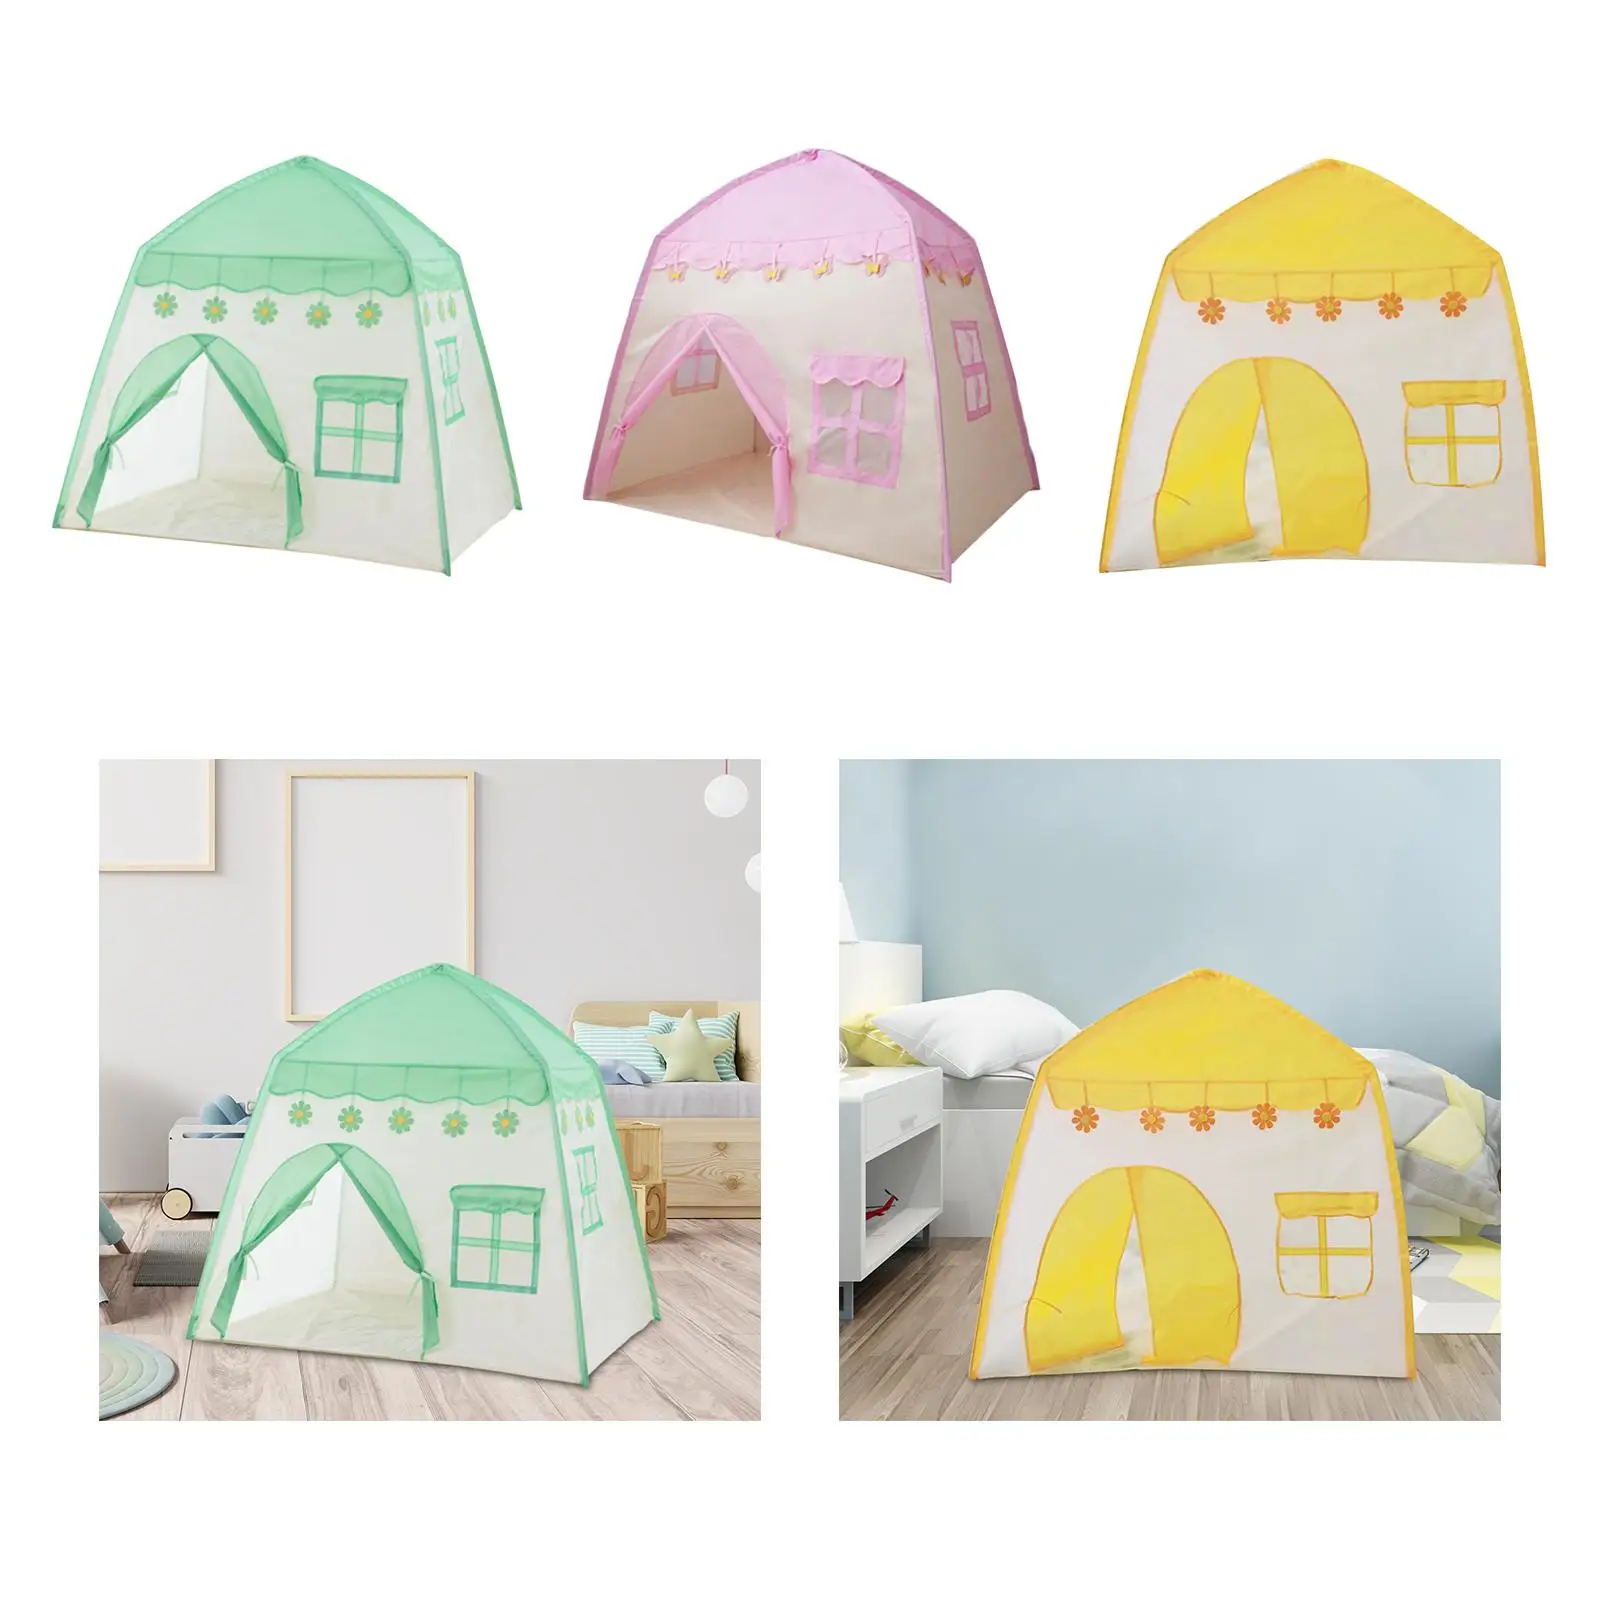 Foldable Children Toy Tent Role Play Game Multifunctional Indoor Outdoor Playground Cute for Park